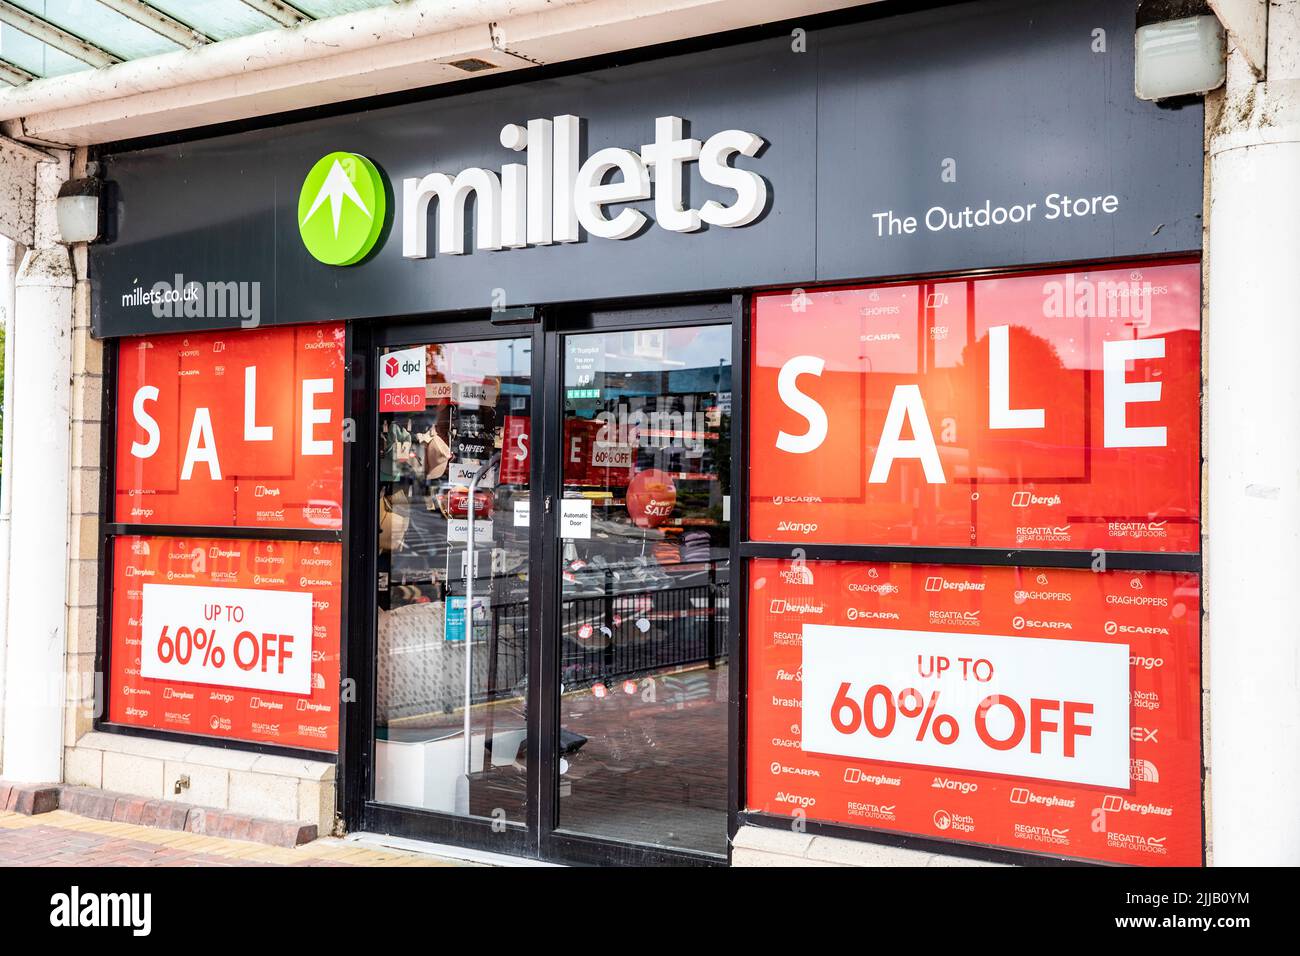 Millets store in Bury,England, summer sale up to 60% off, outdoor clothing  and equipment,UK Stock Photo - Alamy